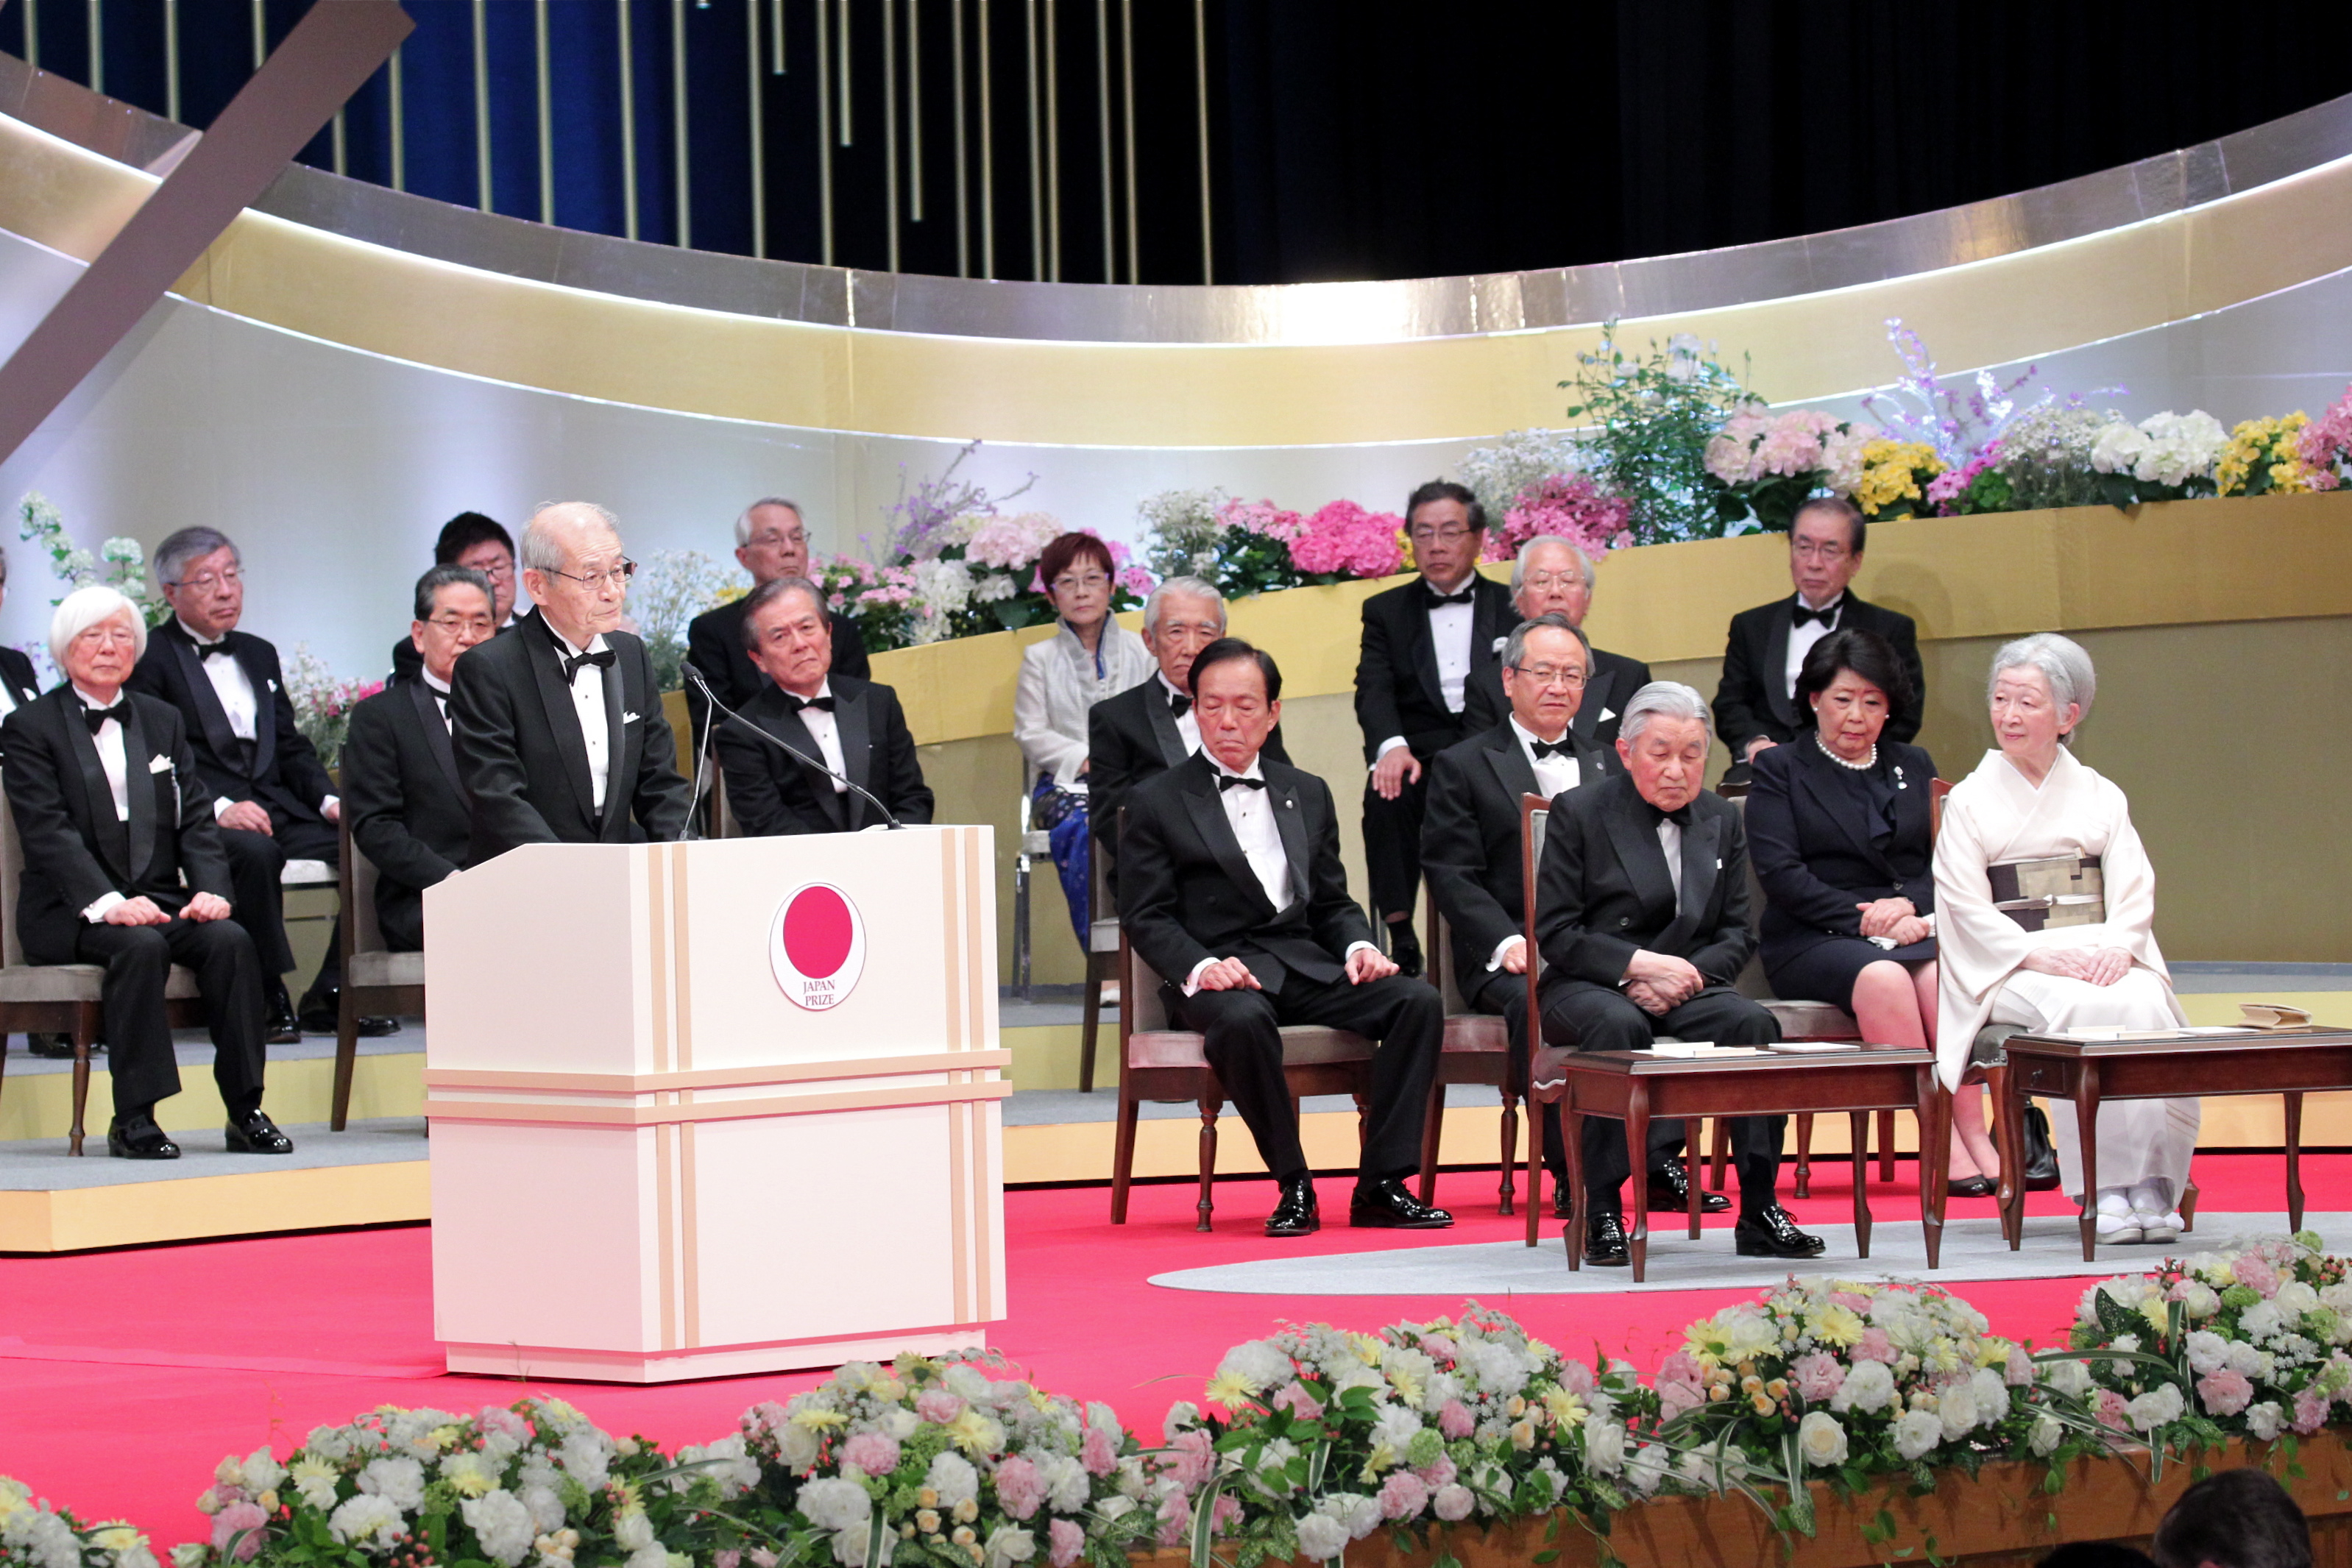 Yoshino addresses the audience at the Japan Prize ceremony.